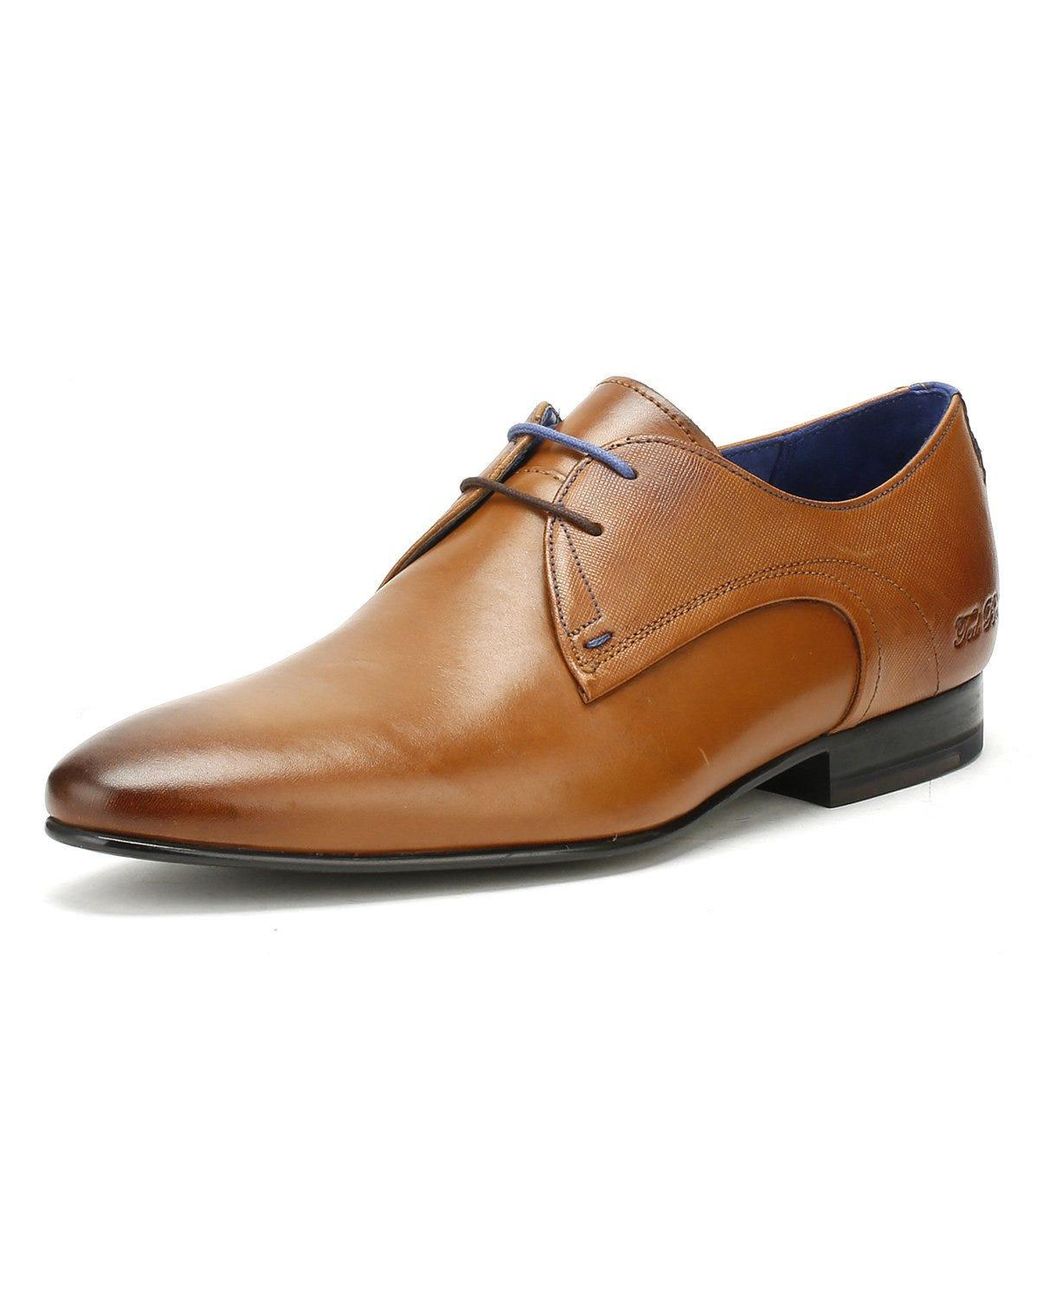 Ted Baker Mens Tan Leather Peair Shoes 